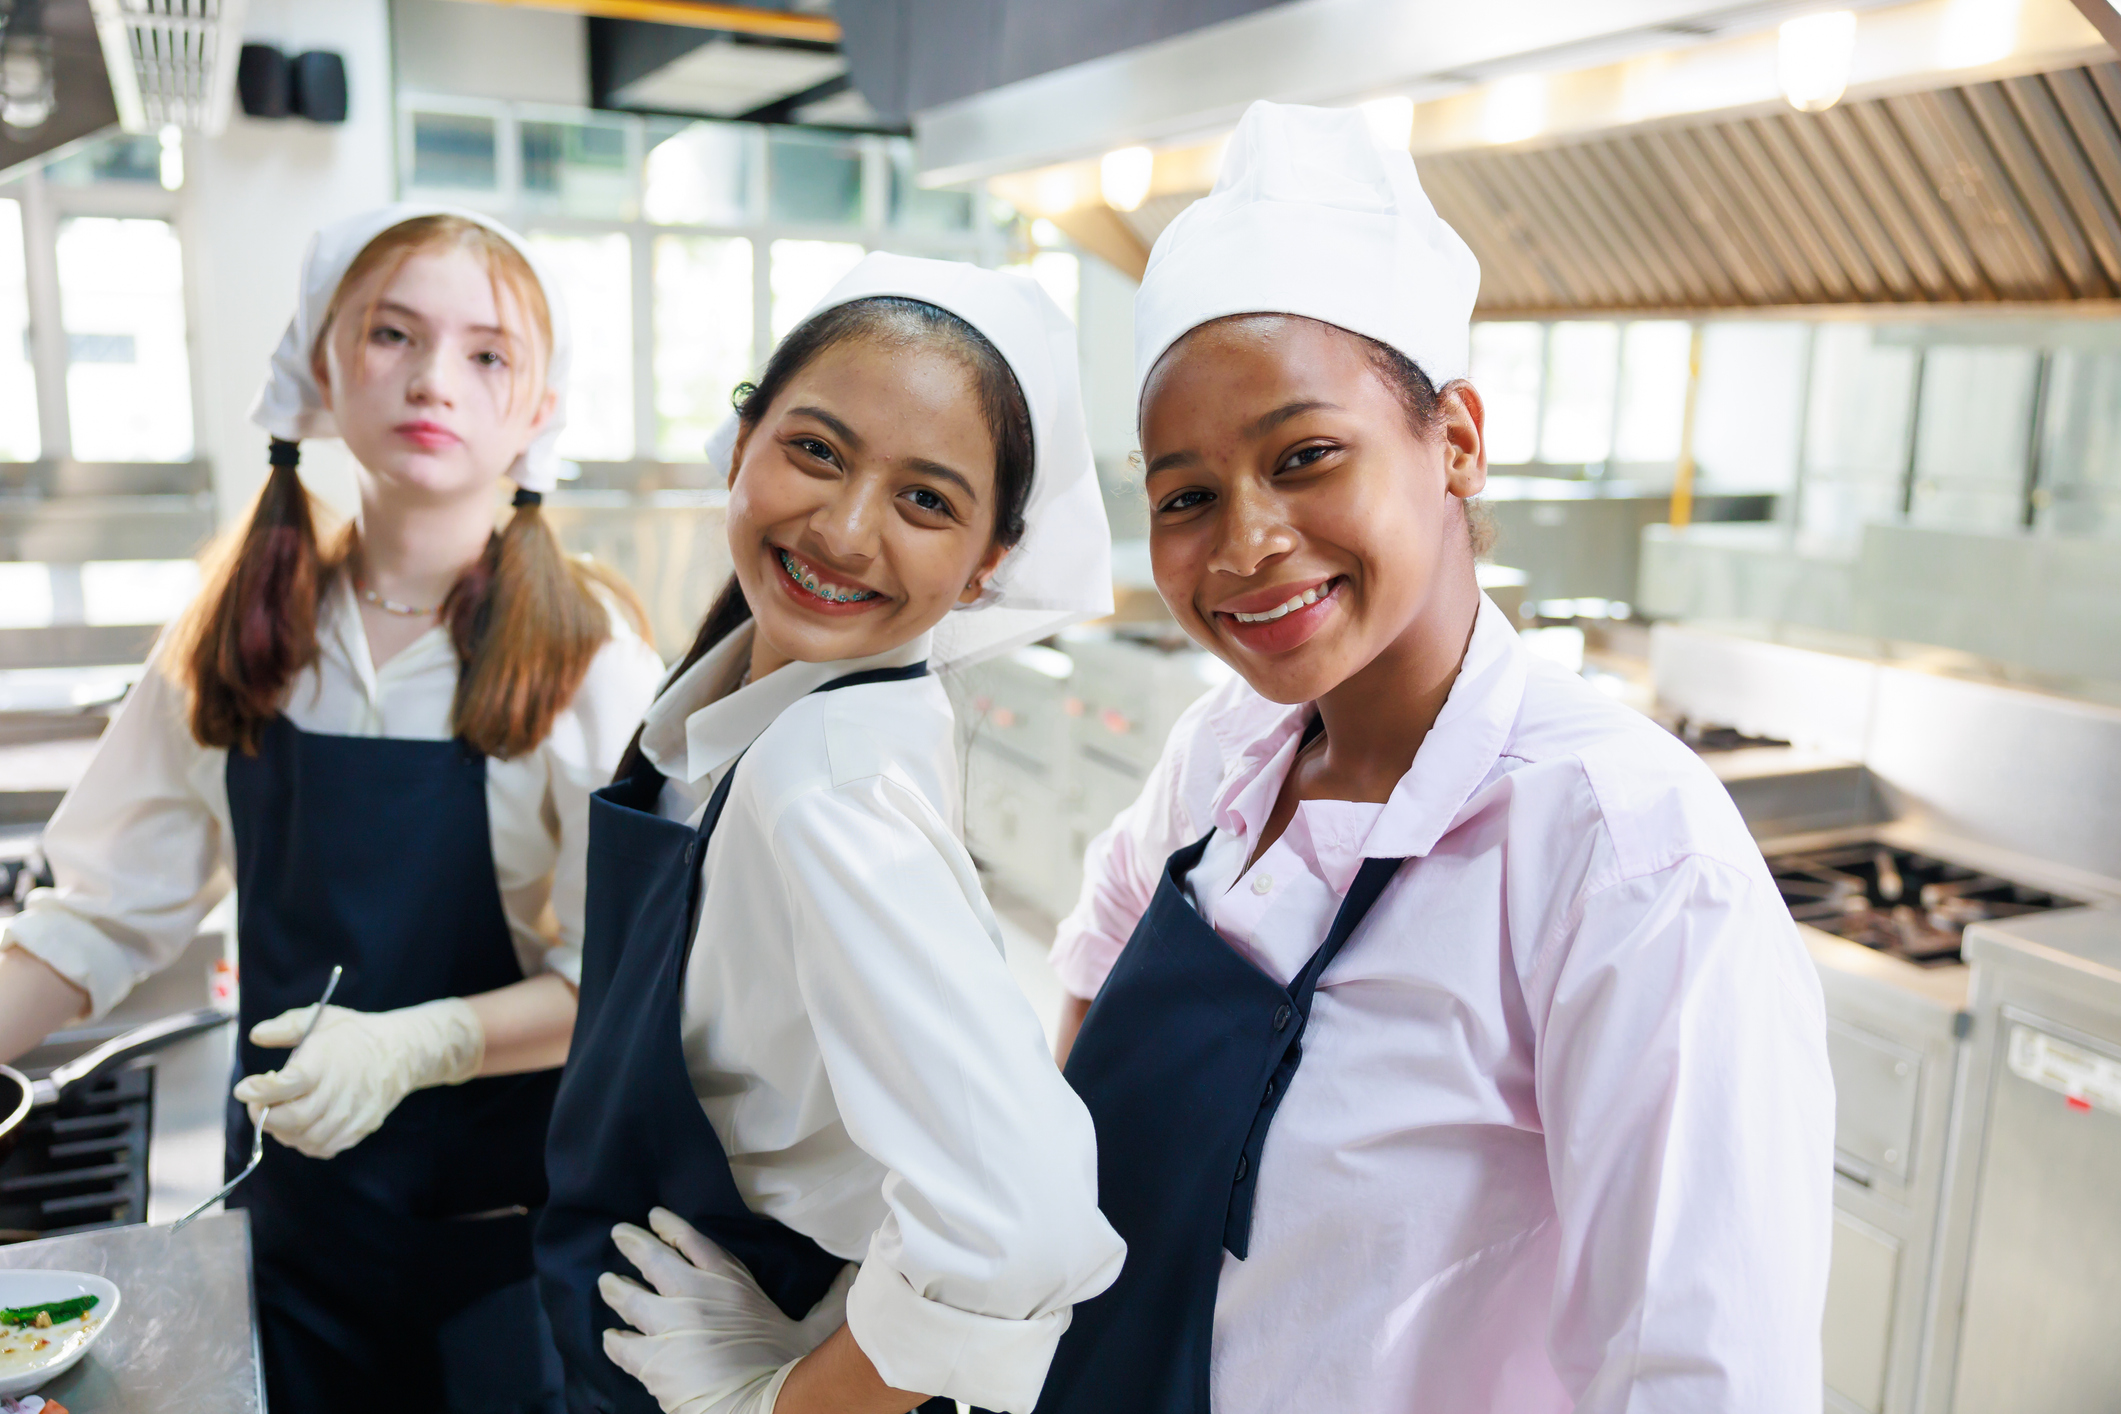 3 teen girls wearing chef's hats and aprons in a kitchen